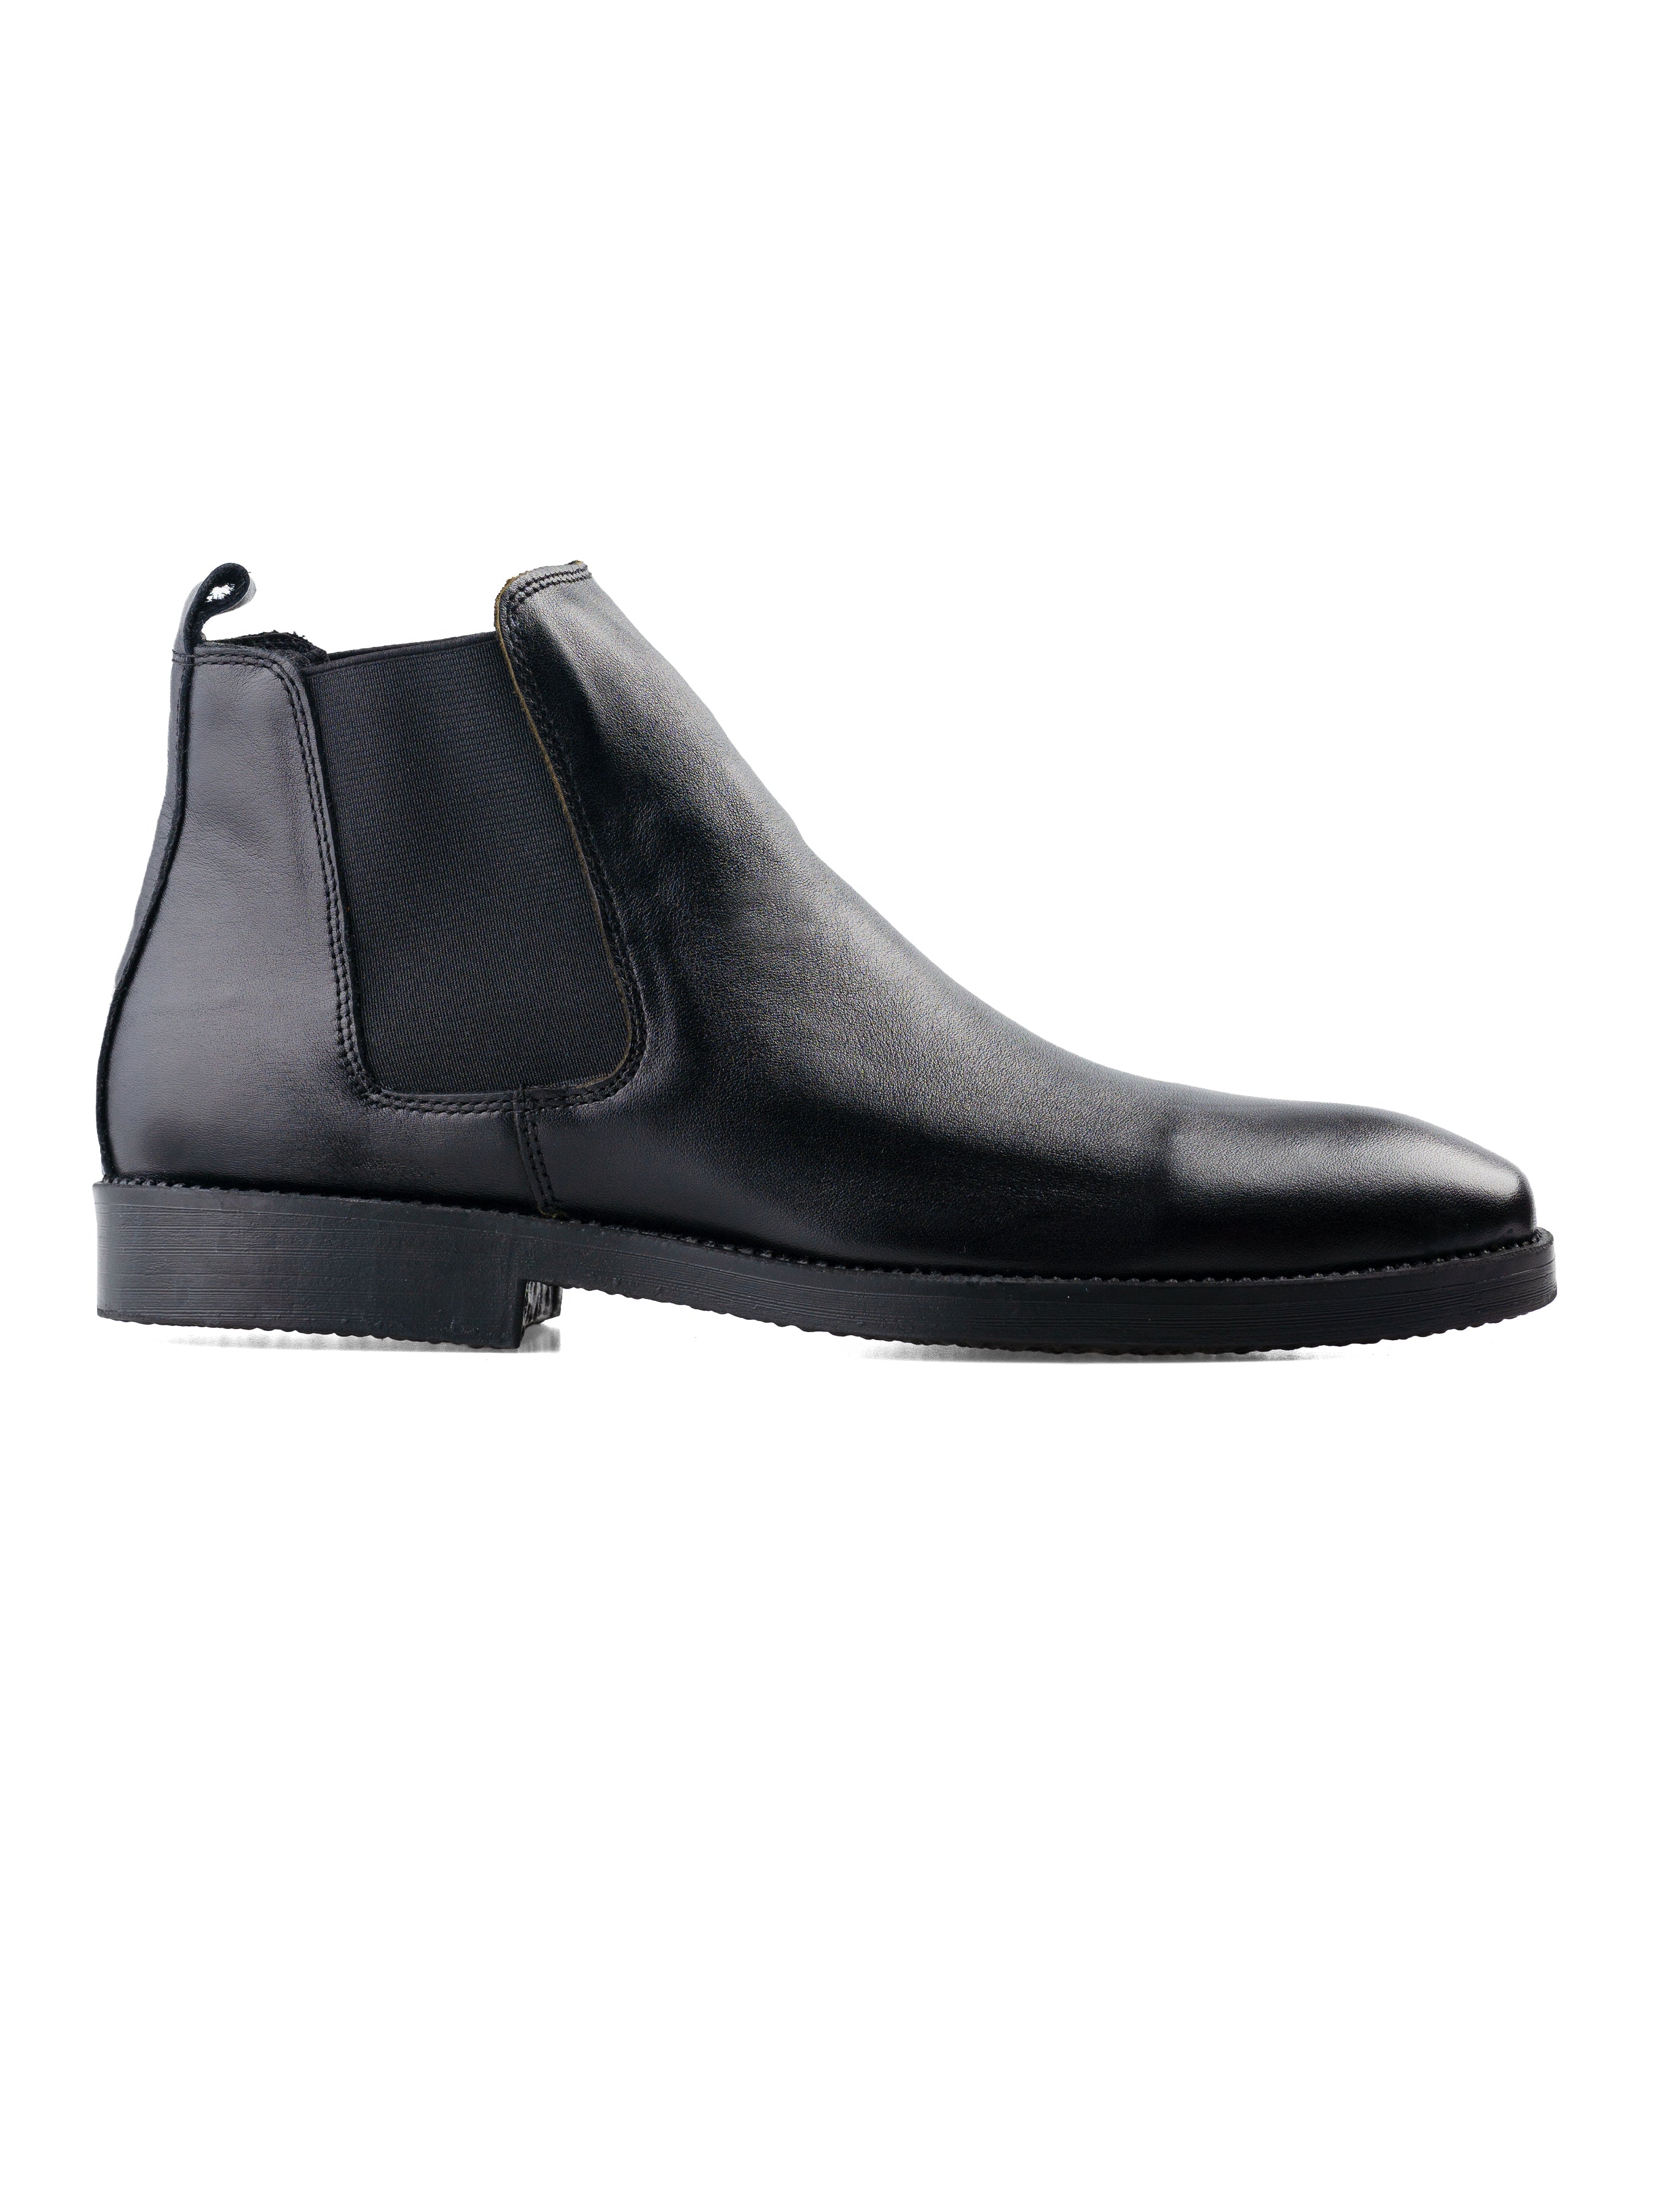 Chelsea Boots - Black Polished Leather (Crepe Sole)